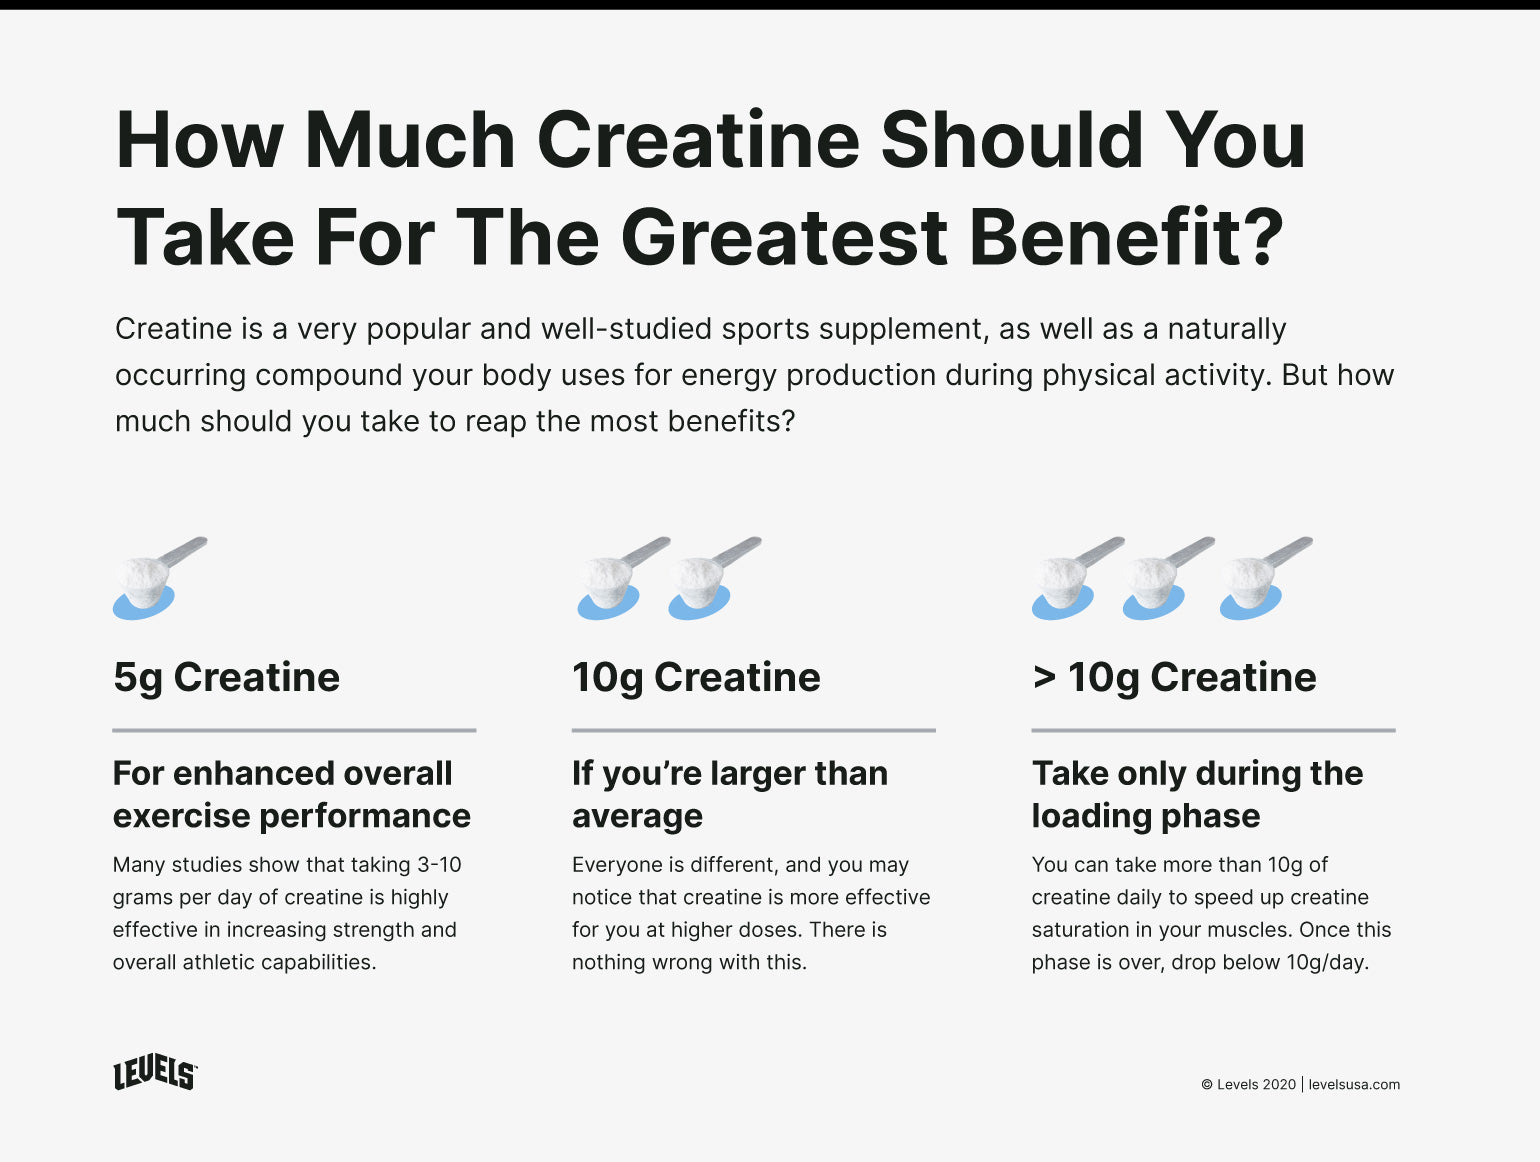 Is 10g of creatine a day too much?